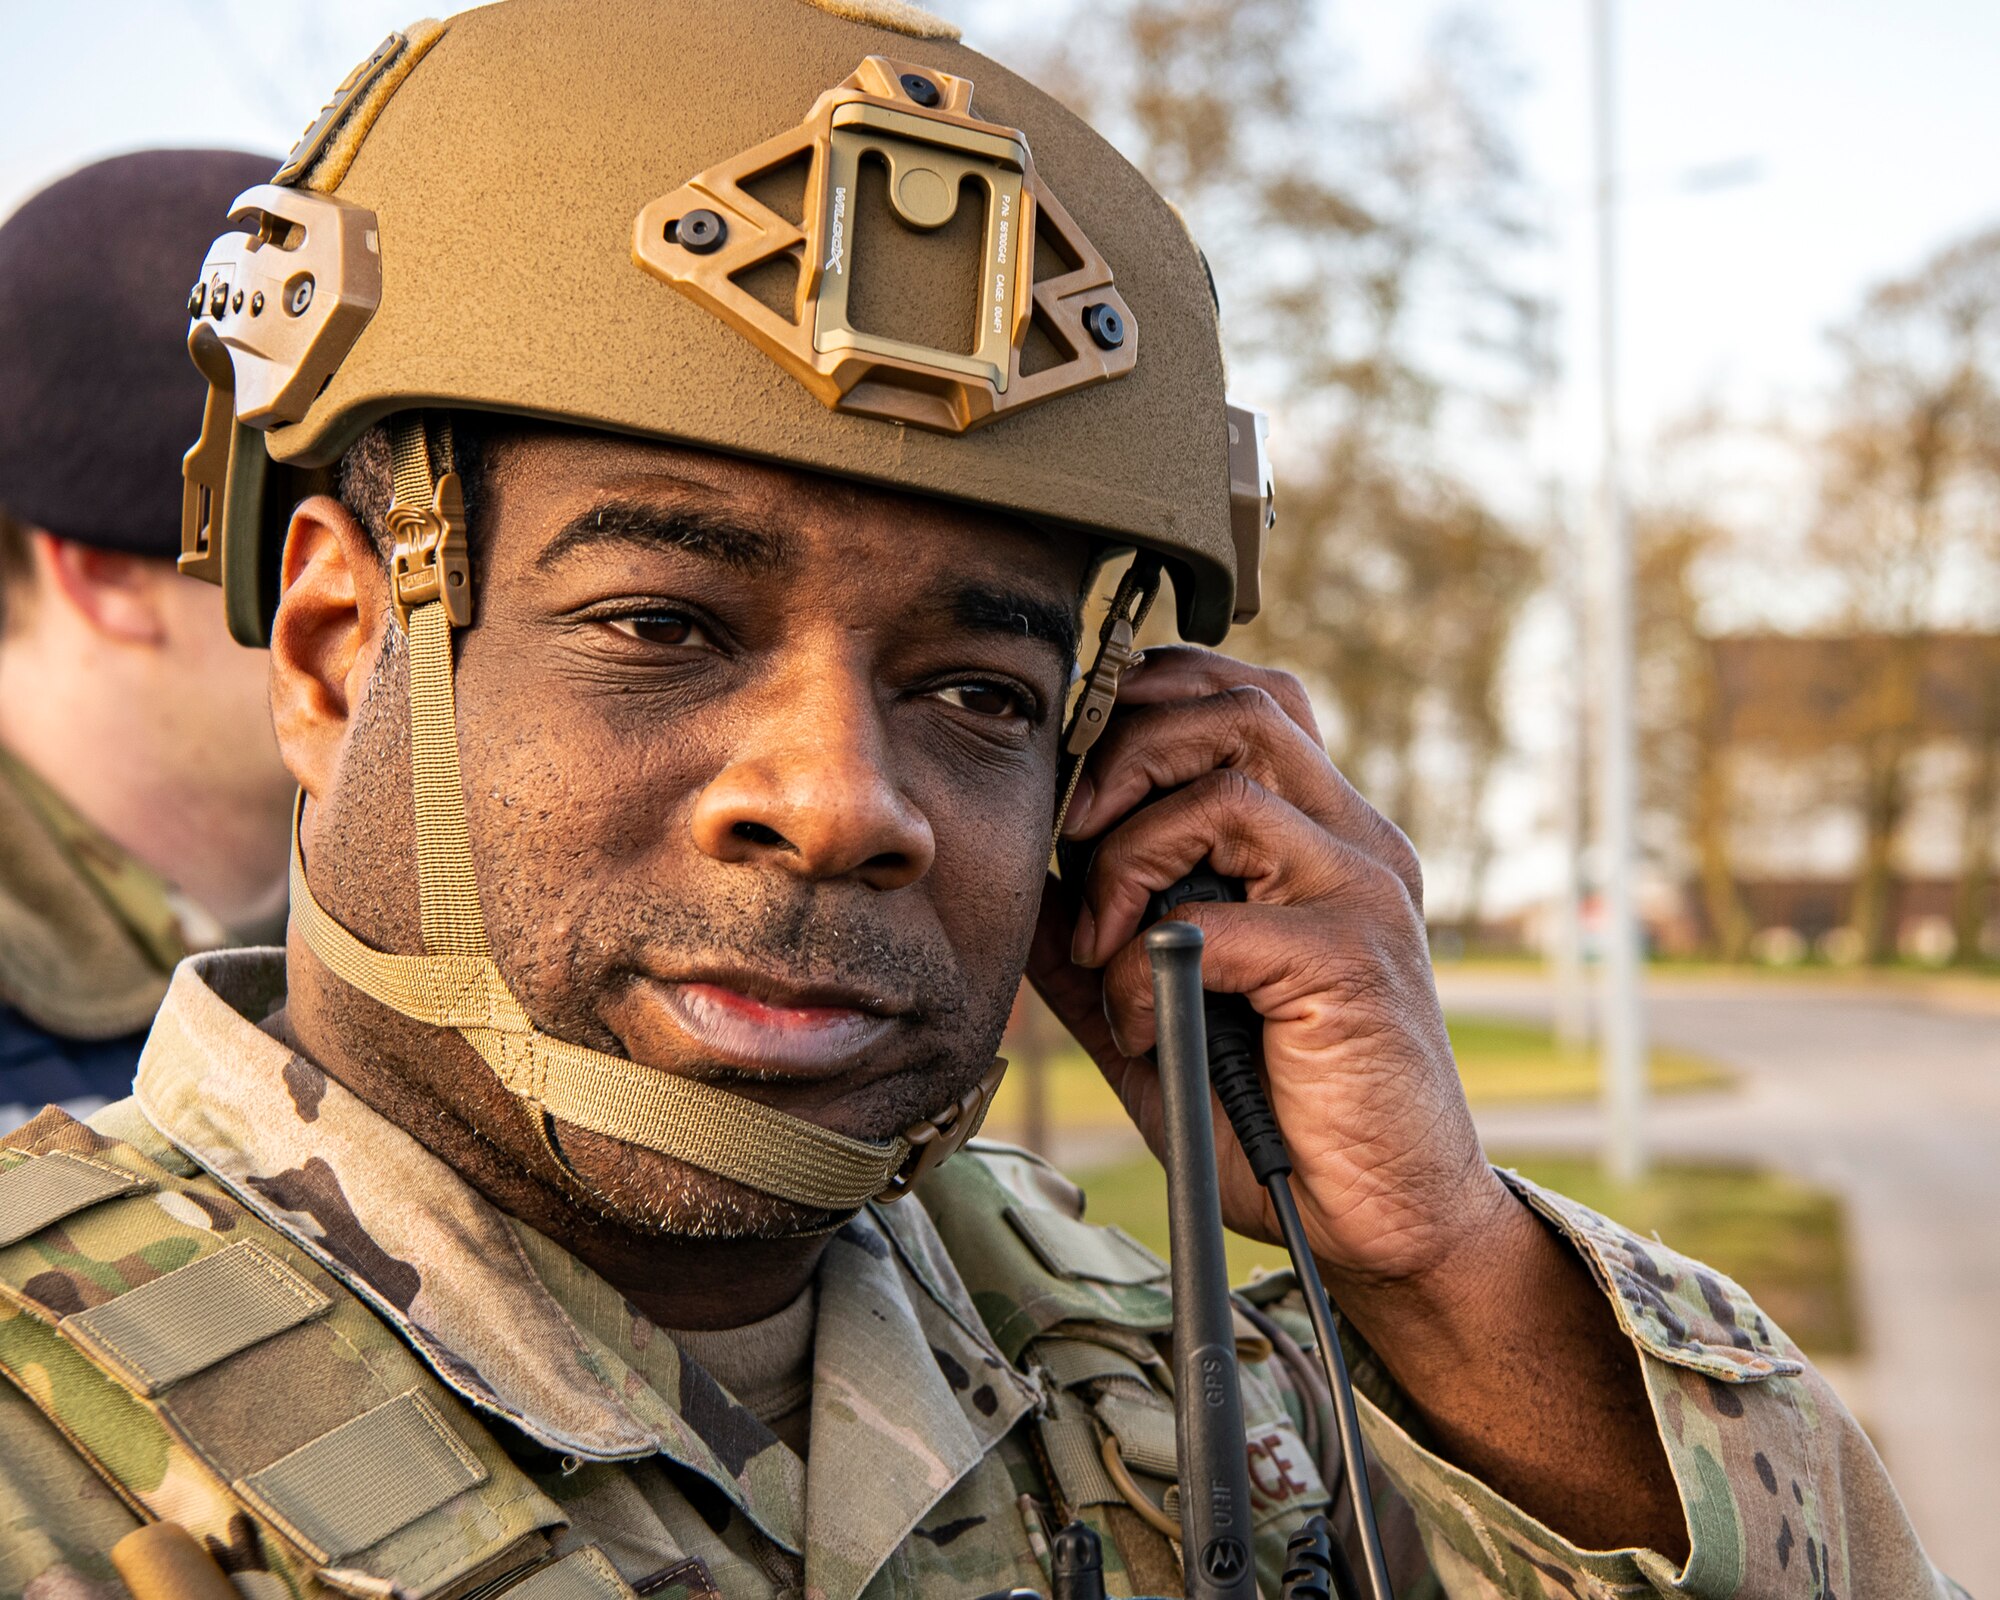 Tech Sgt. Lamont Hudson, 423d Security Forces Squadron NCO in charge of operations support, listens to a radio during a readiness exercise, at RAF Molesworth, England, Feb. 11, 2020. The exercise tested the wing’s preparedness and response capabilities to an emergency situation. (U.S. Air Force photo by Senior Airman Eugene Oliver)